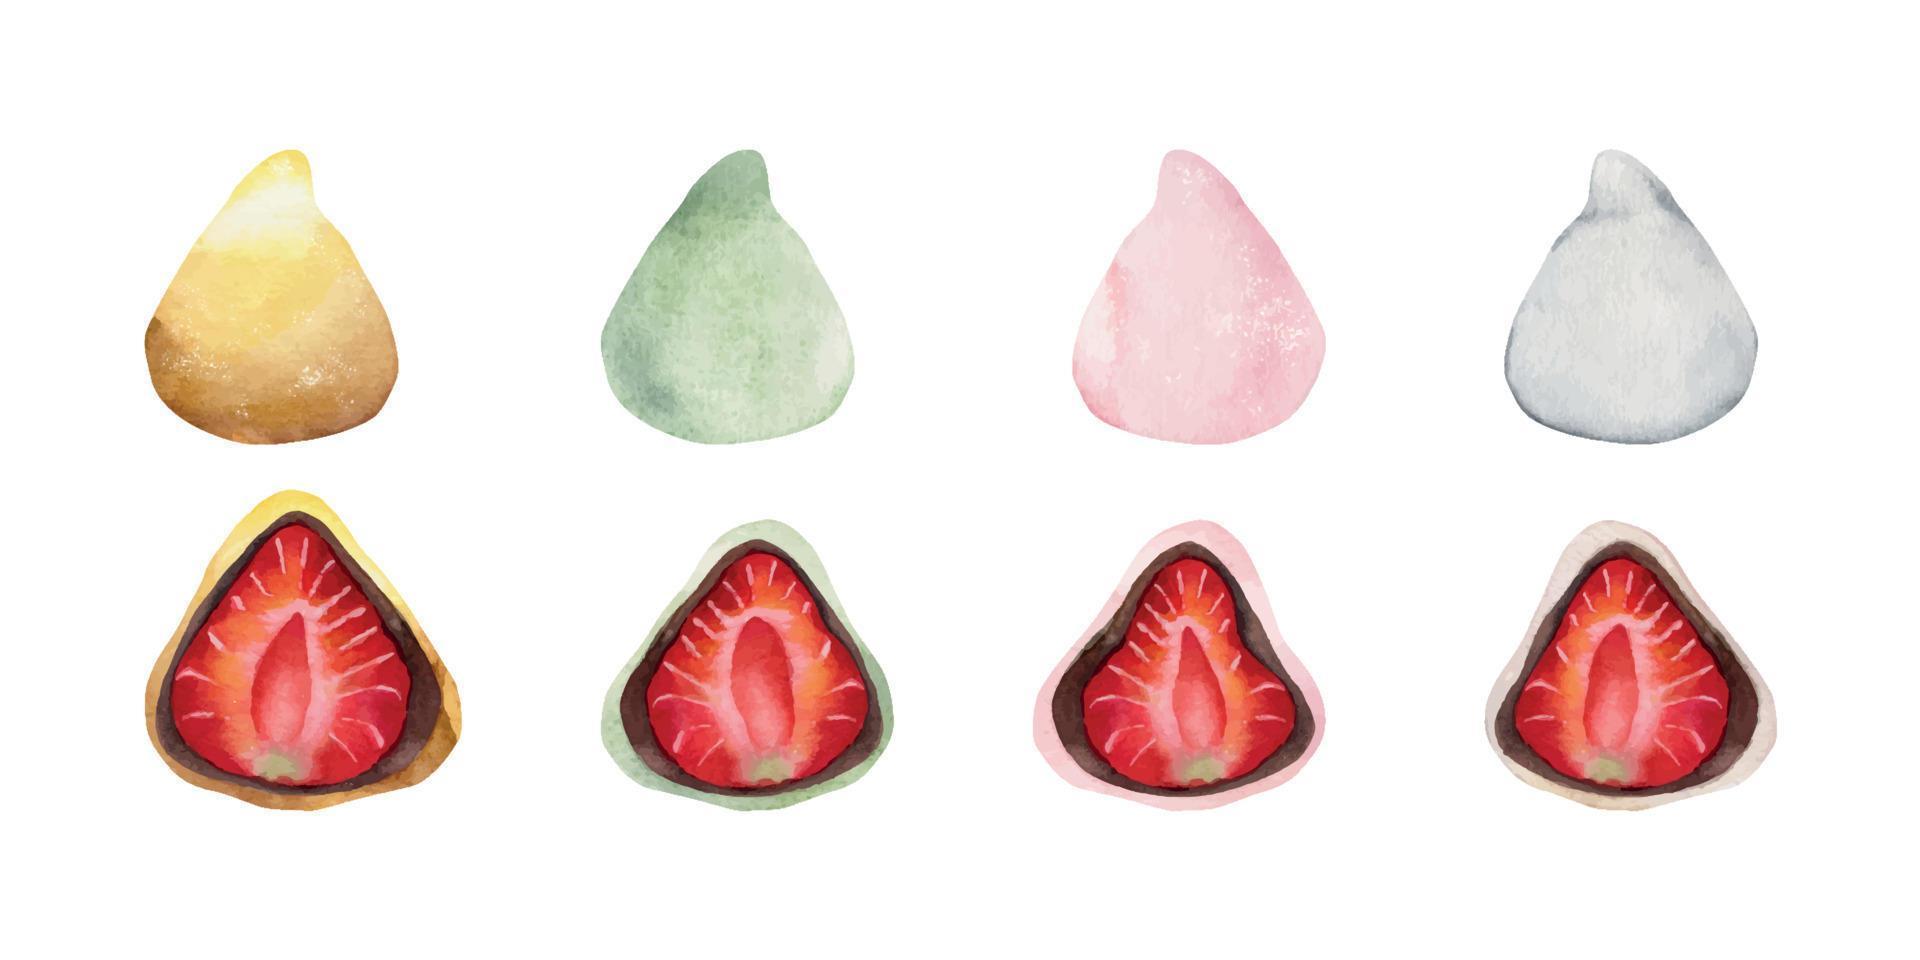 Watercolor hand drawn traditional Japanese sweets. Assortment of strawberry daifuku mochi. Isolated on white background. Design for invitations, restaurant menu, greeting cards, print, textile vector